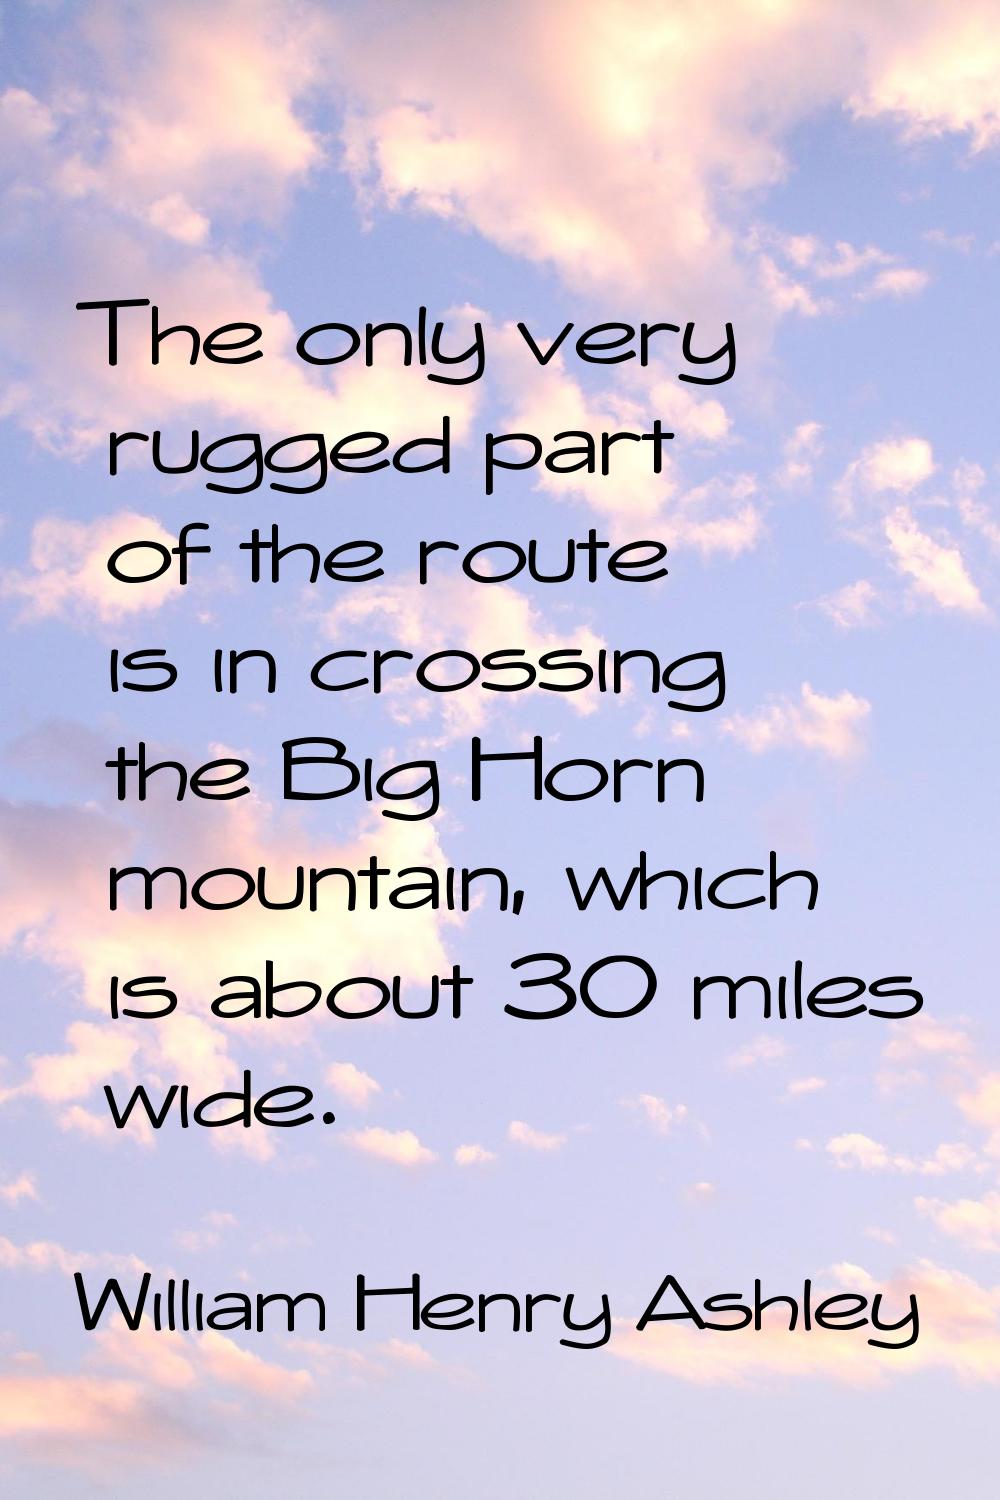 The only very rugged part of the route is in crossing the Big Horn mountain, which is about 30 mile